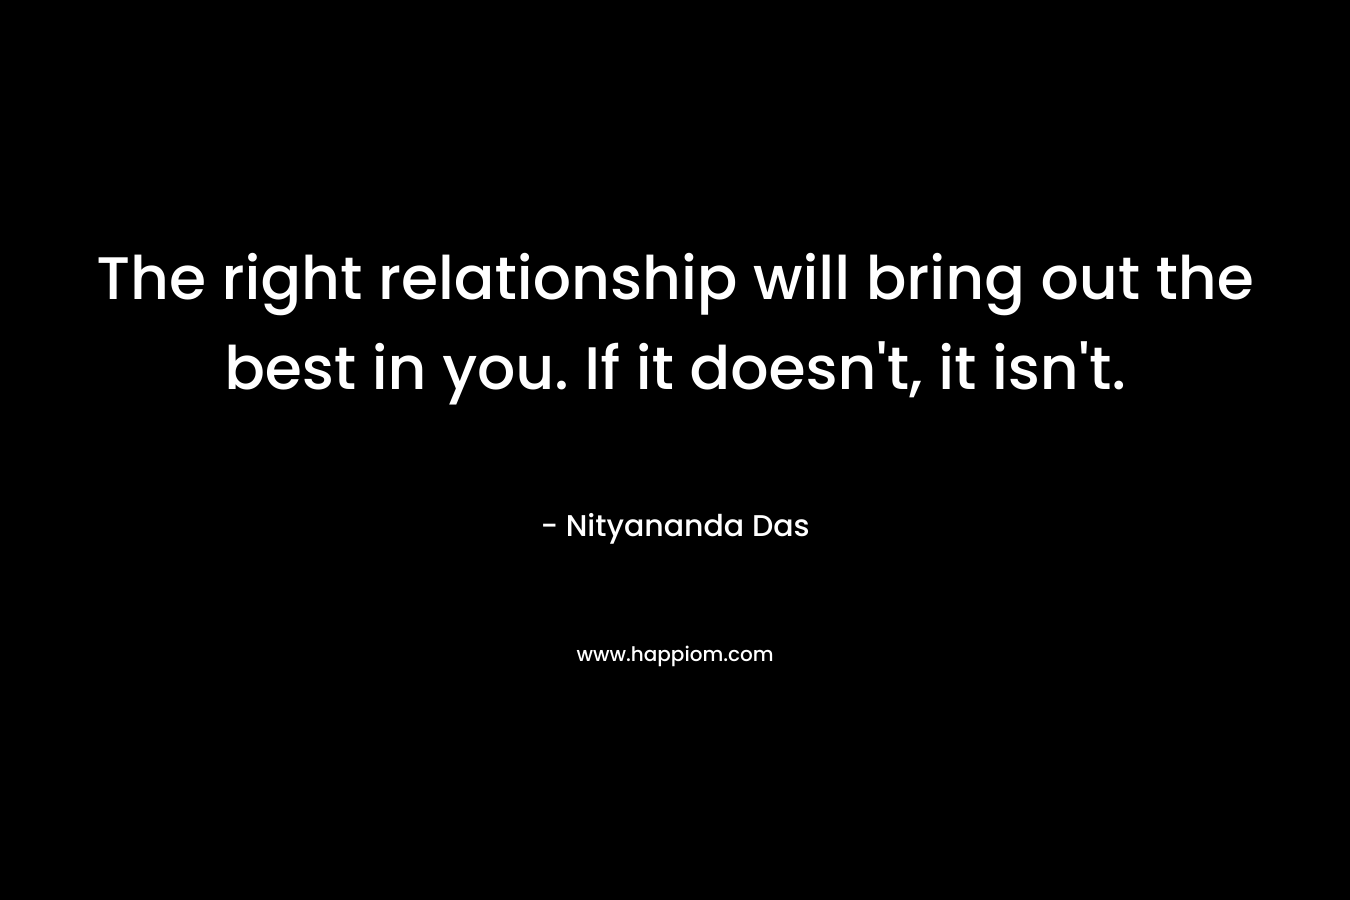 The right relationship will bring out the best in you. If it doesn’t, it isn’t. – Nityananda Das